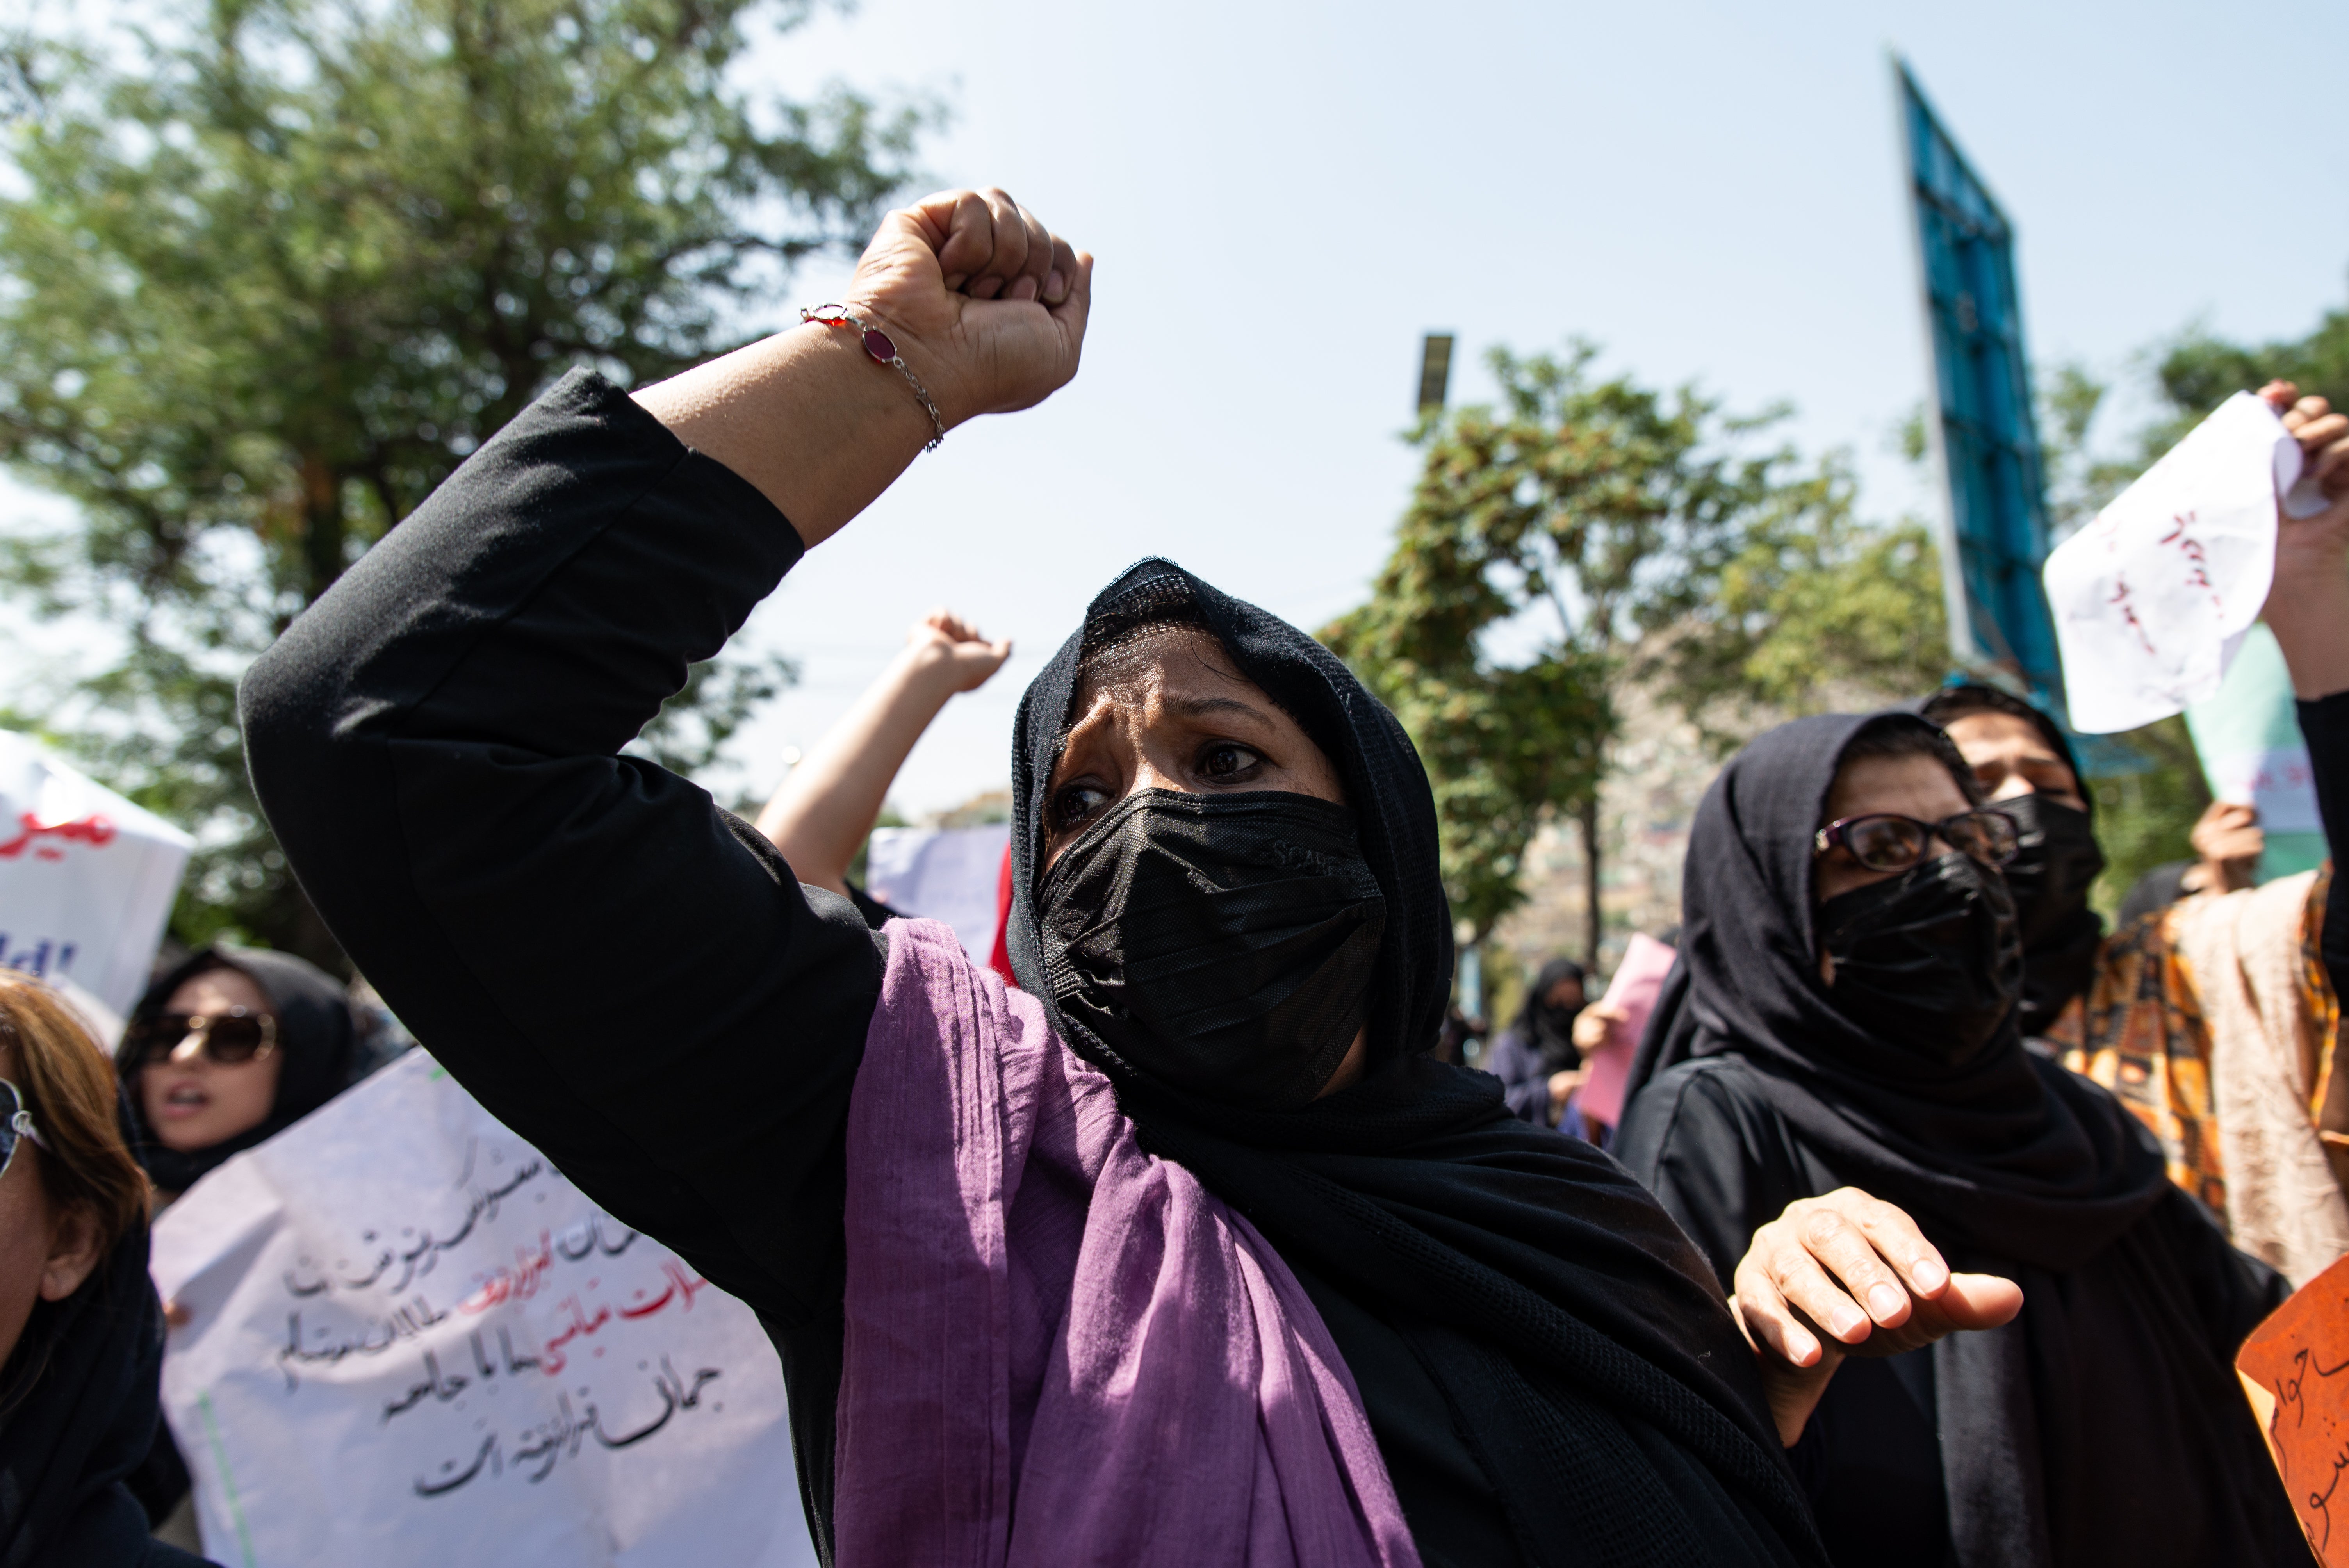 Just this weekend a protest of women was dispersed in Kabul